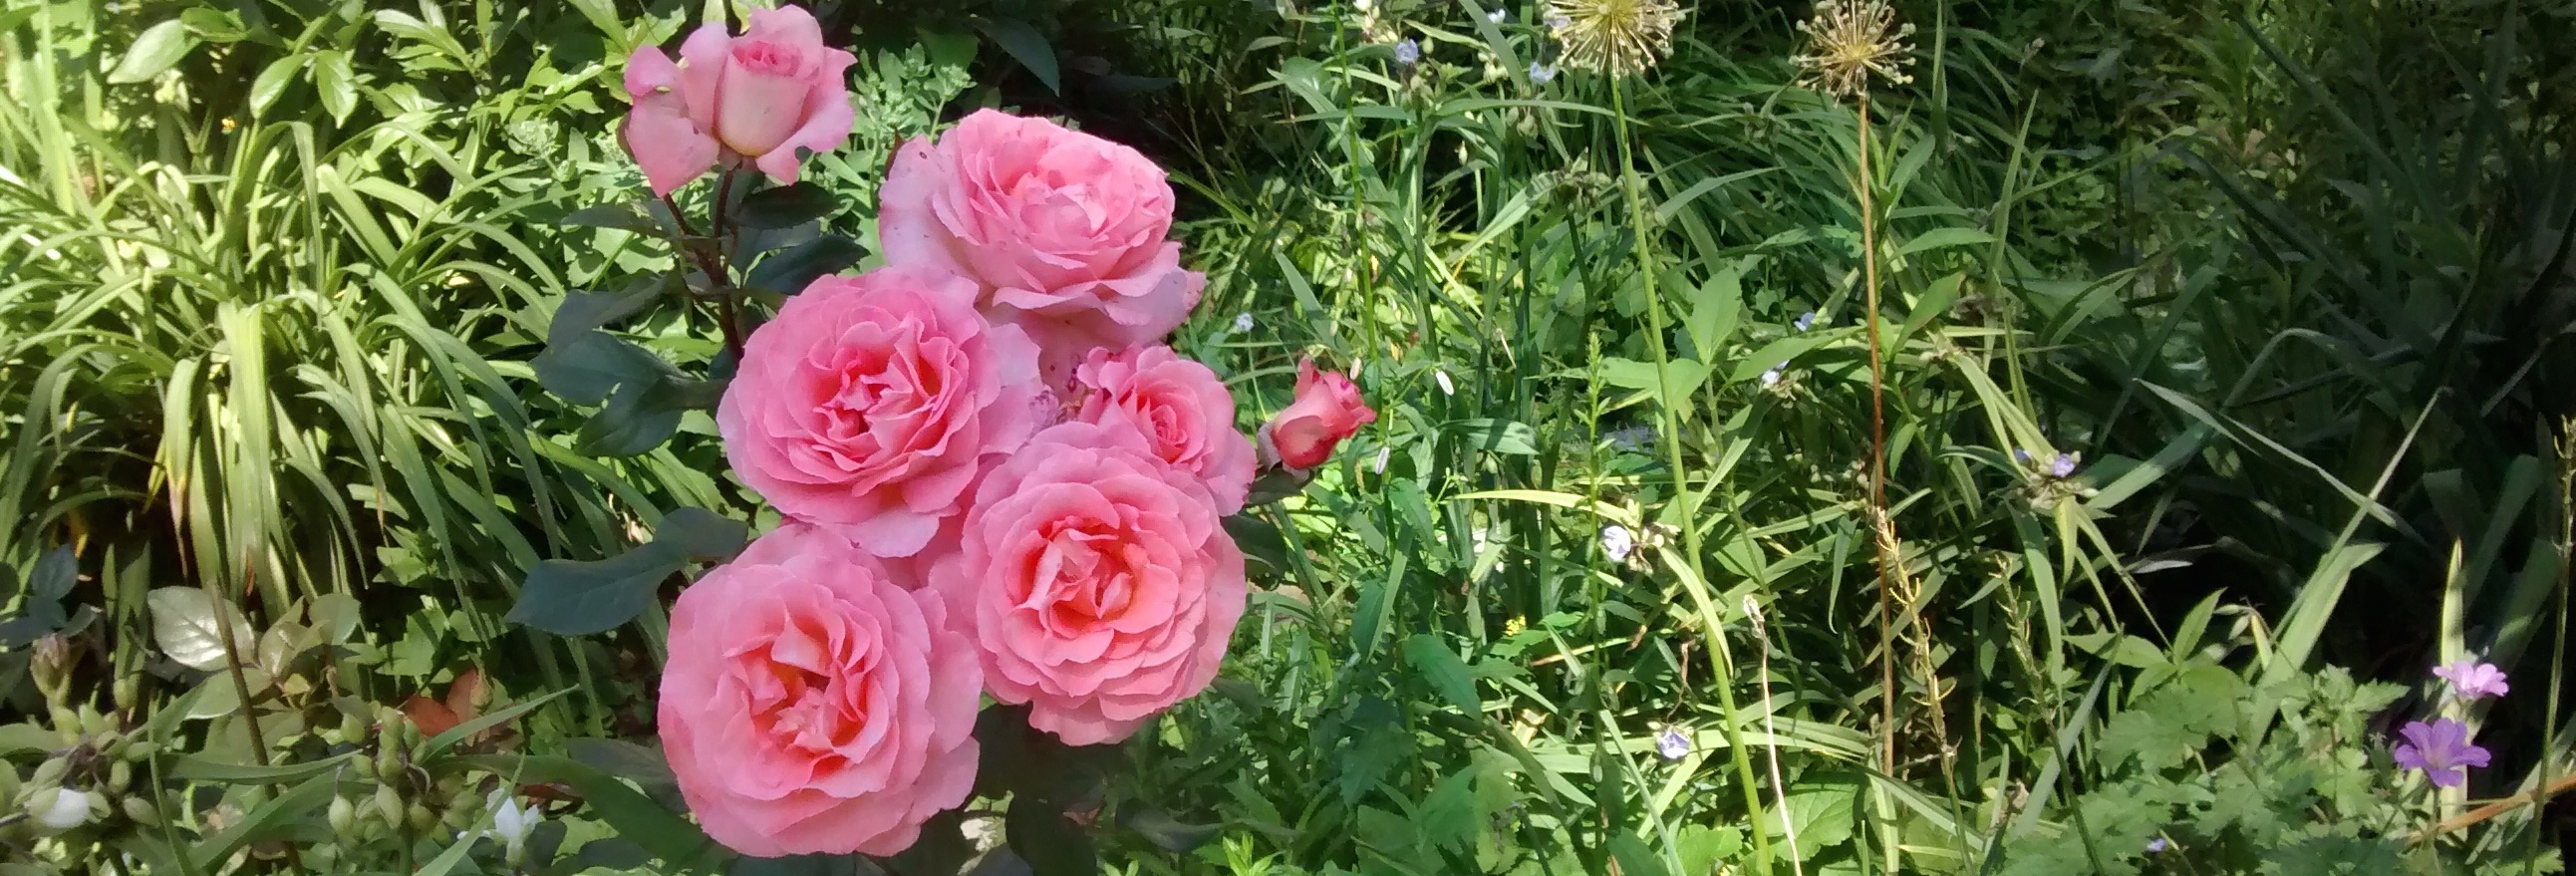 a small pink rosebush in bloom in the middle of a green garden